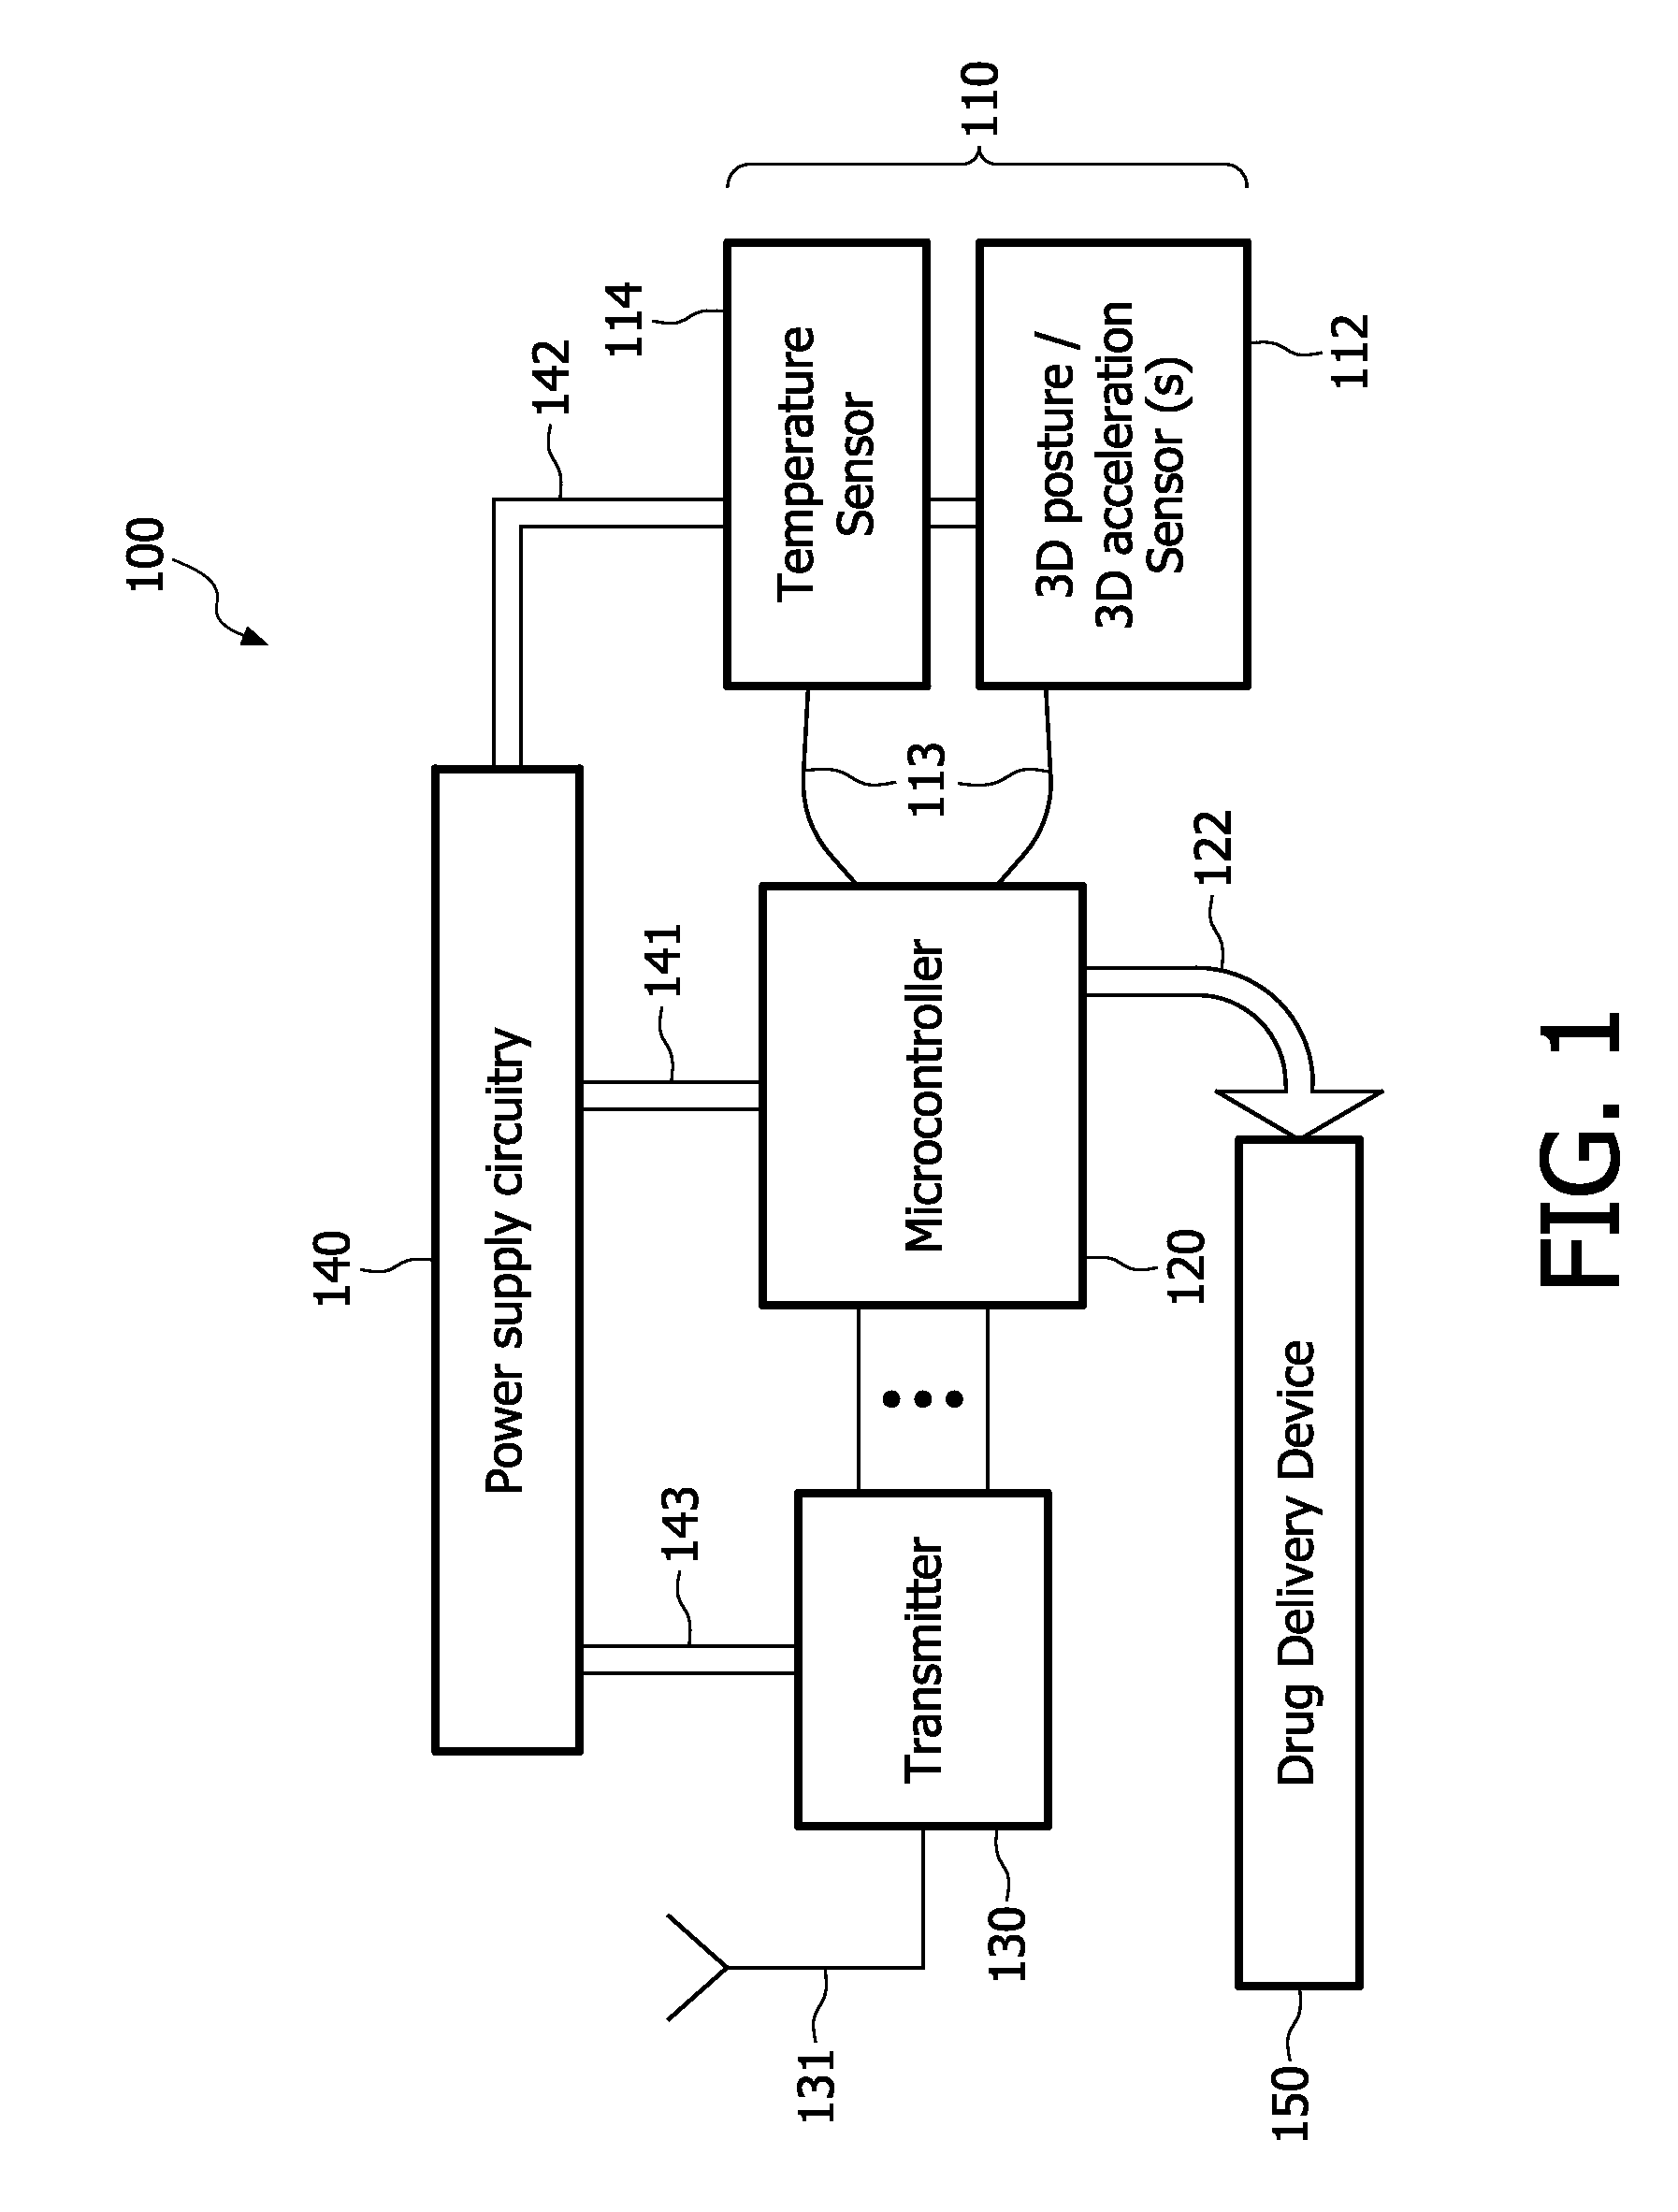 Automatic drug administration with reduced power consumption